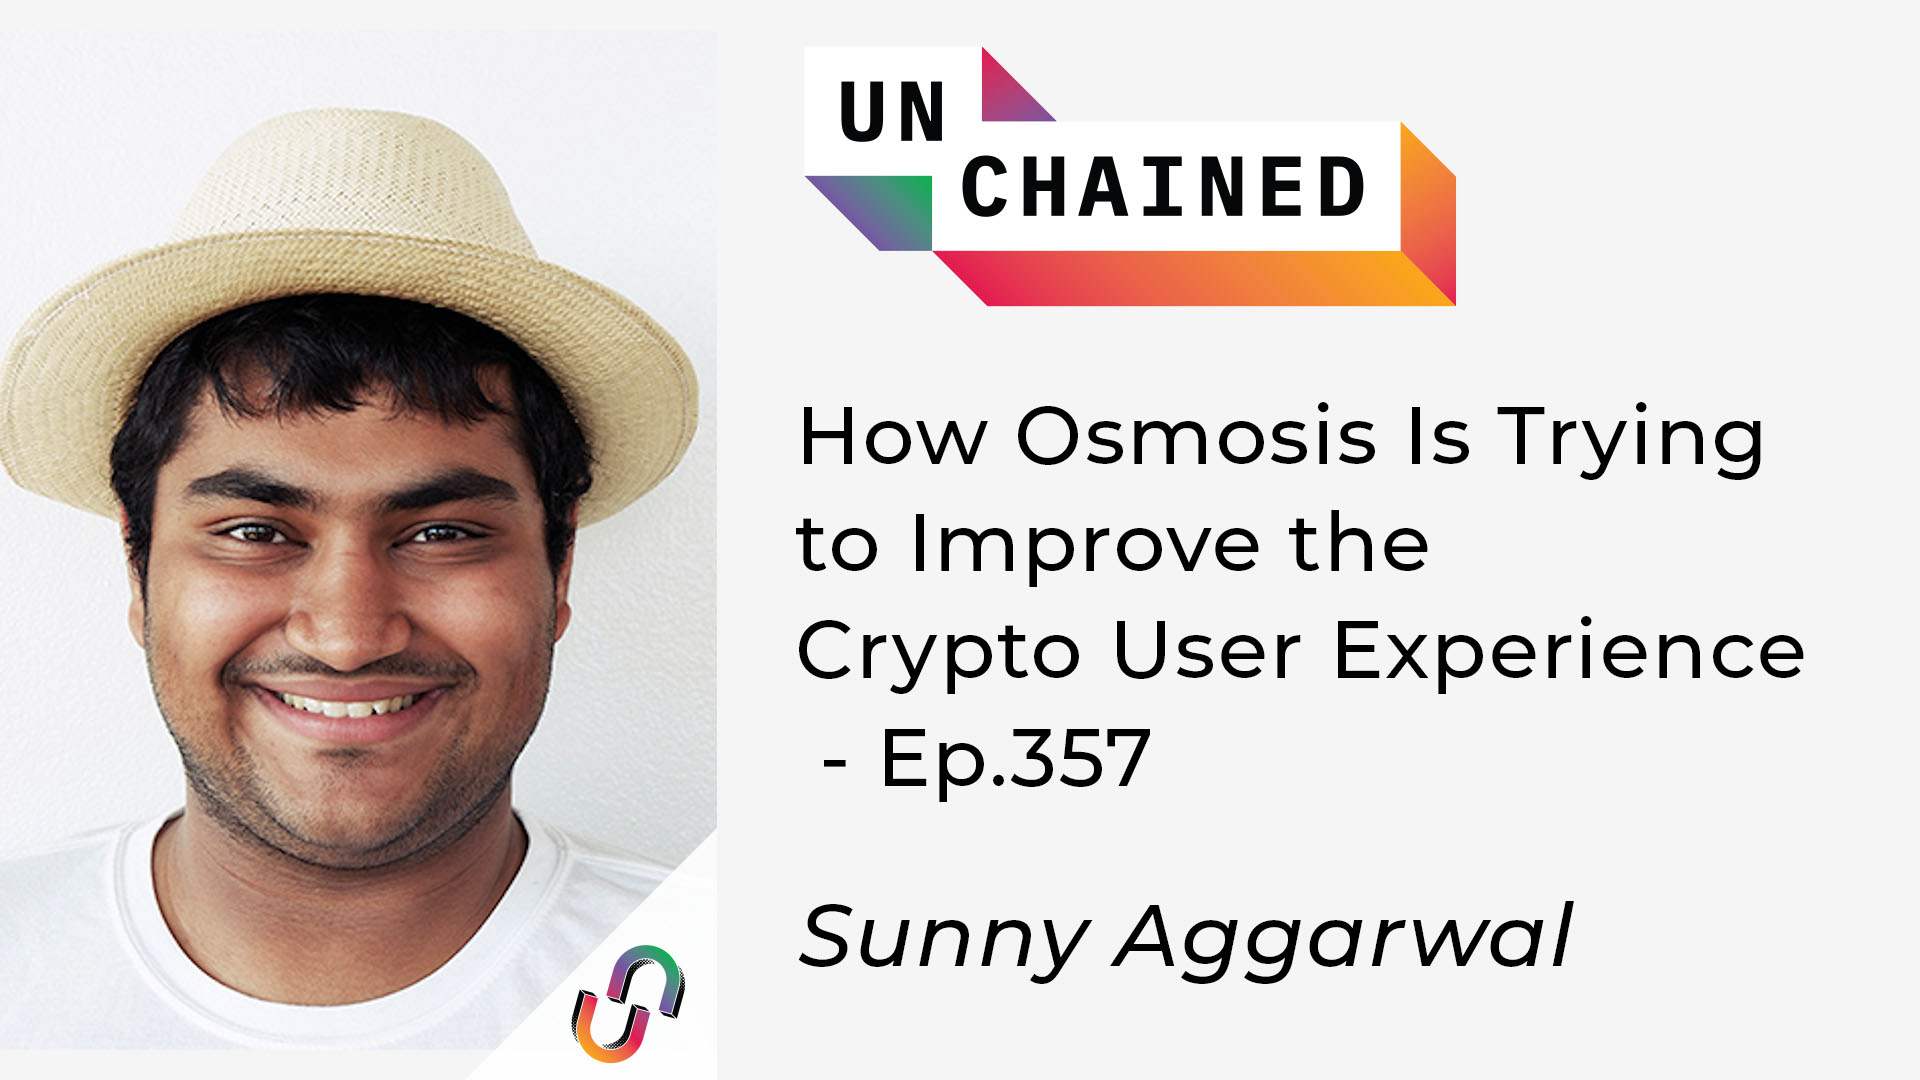 Unchained - Ep.357 - How Osmosis Is Trying to Improve the Crypto User Experience